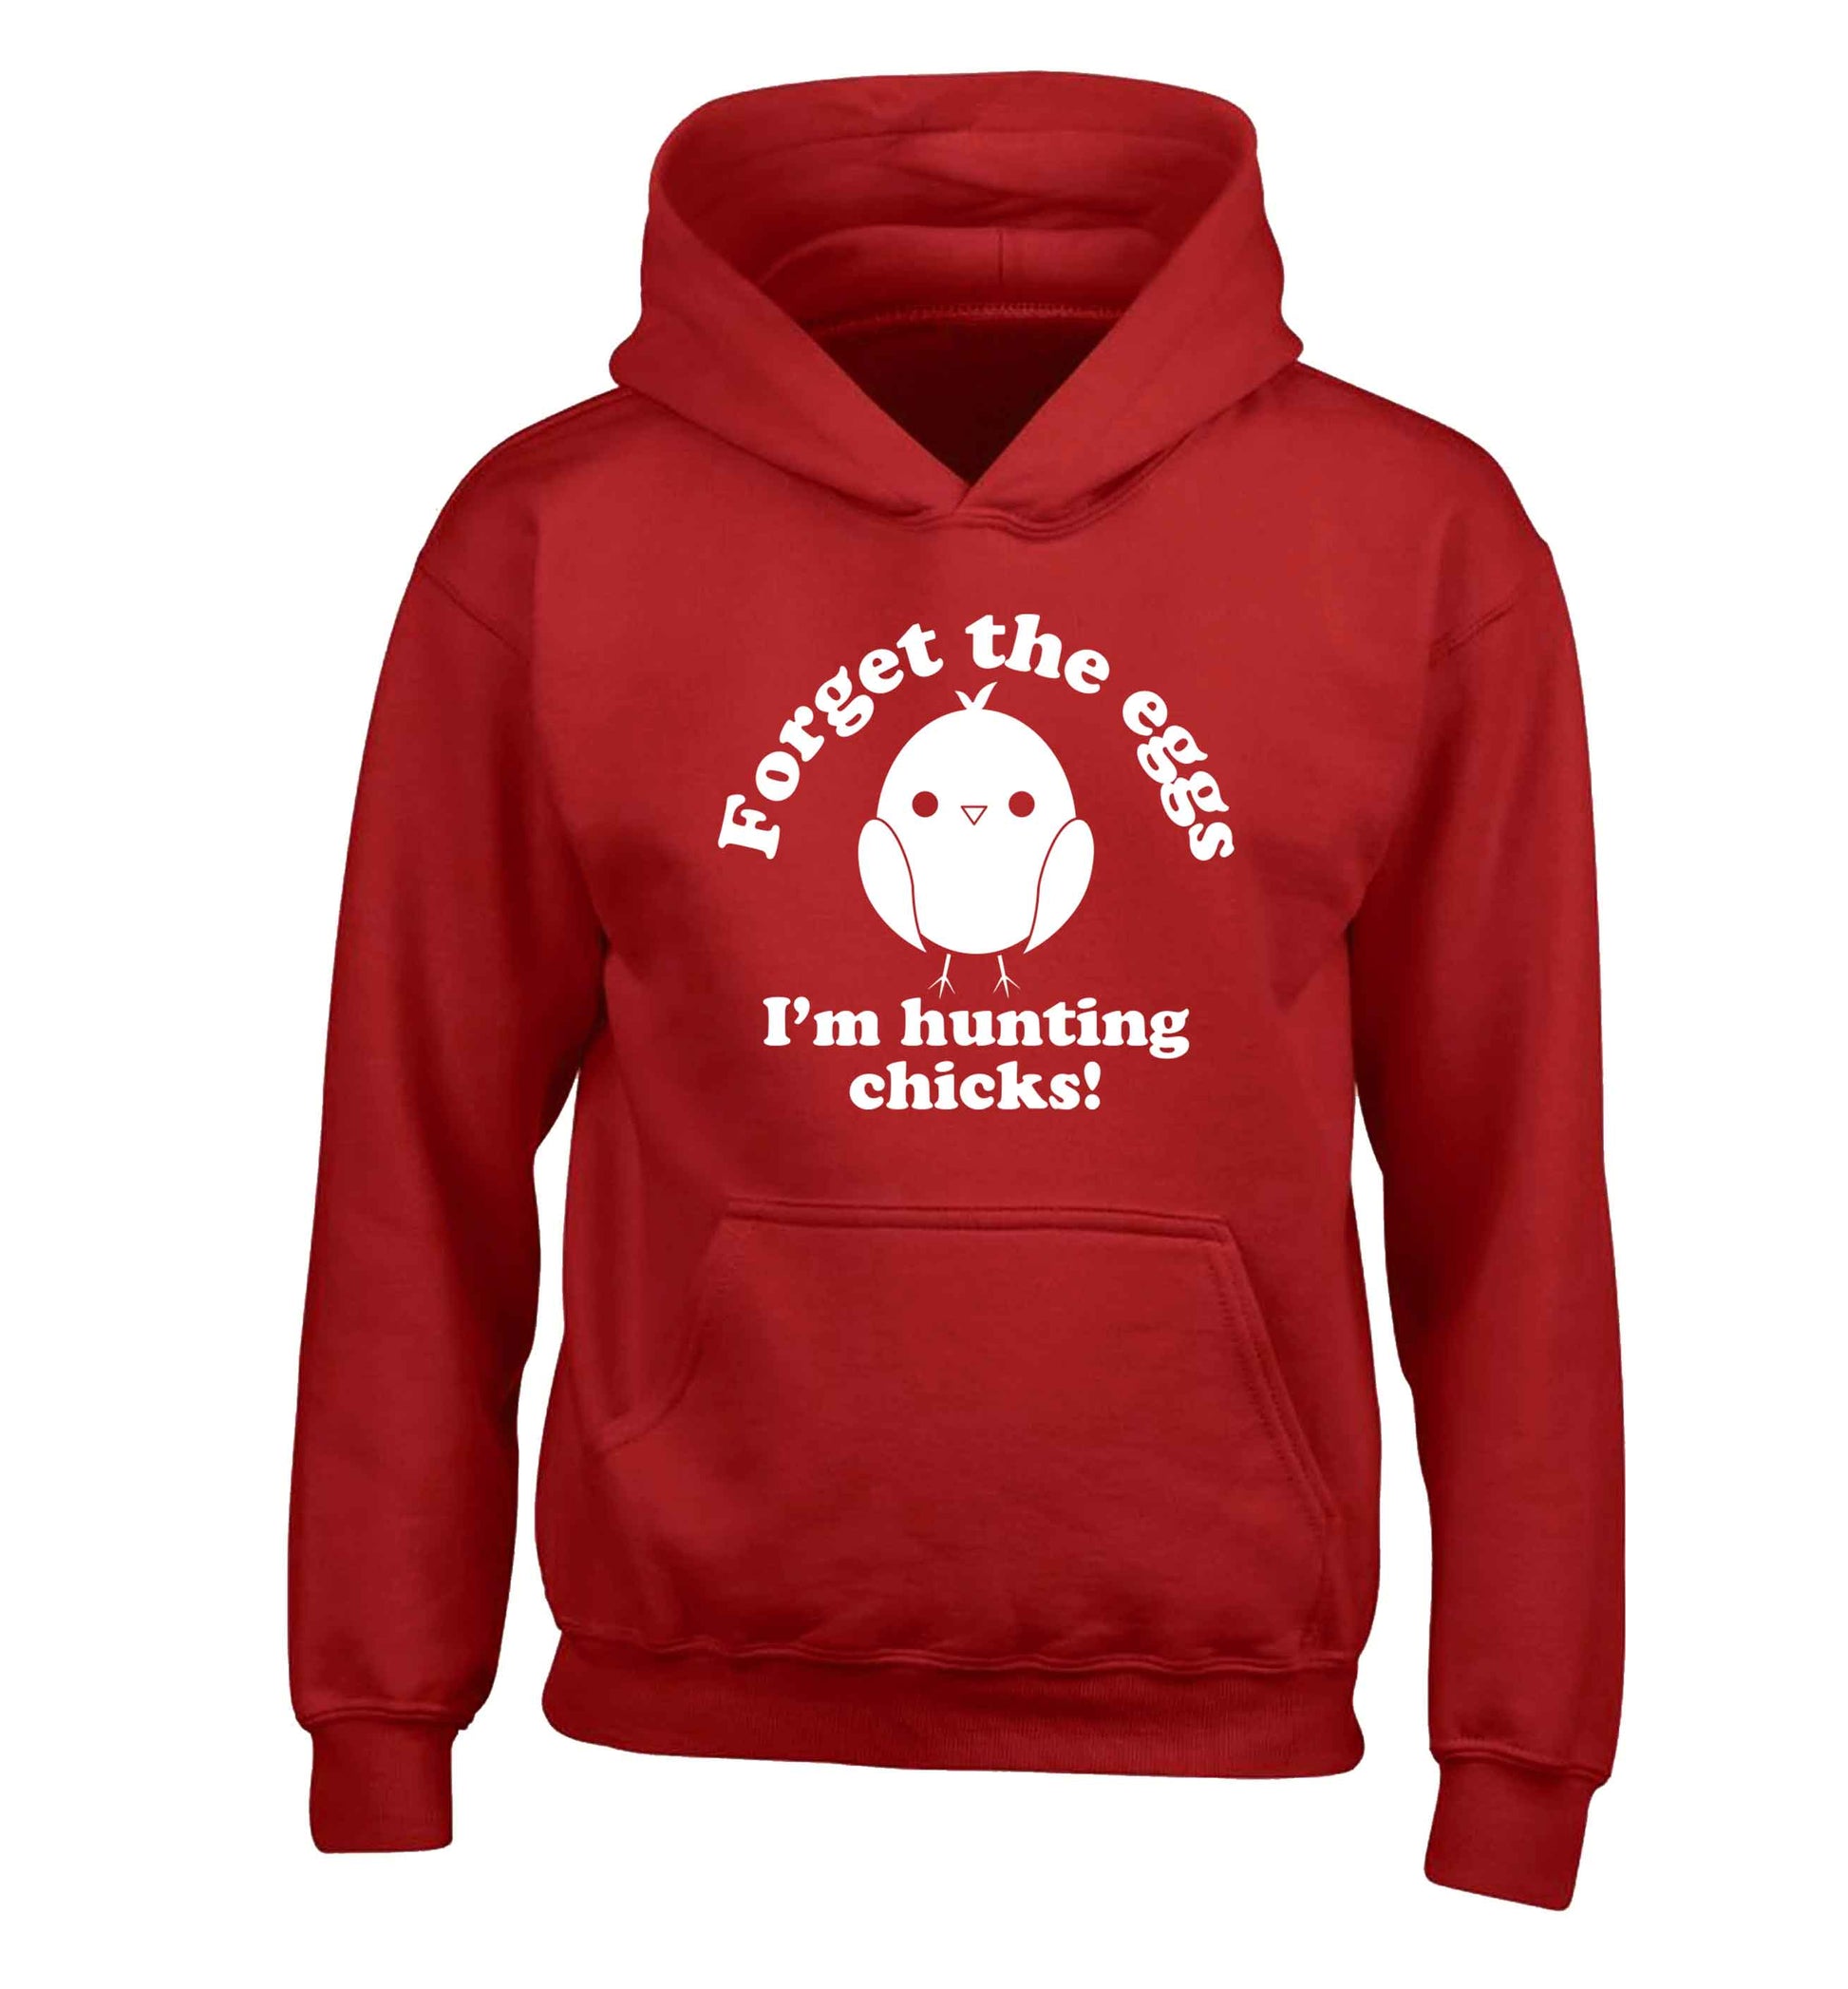 Forget the eggs I'm hunting chicks! children's red hoodie 12-13 Years